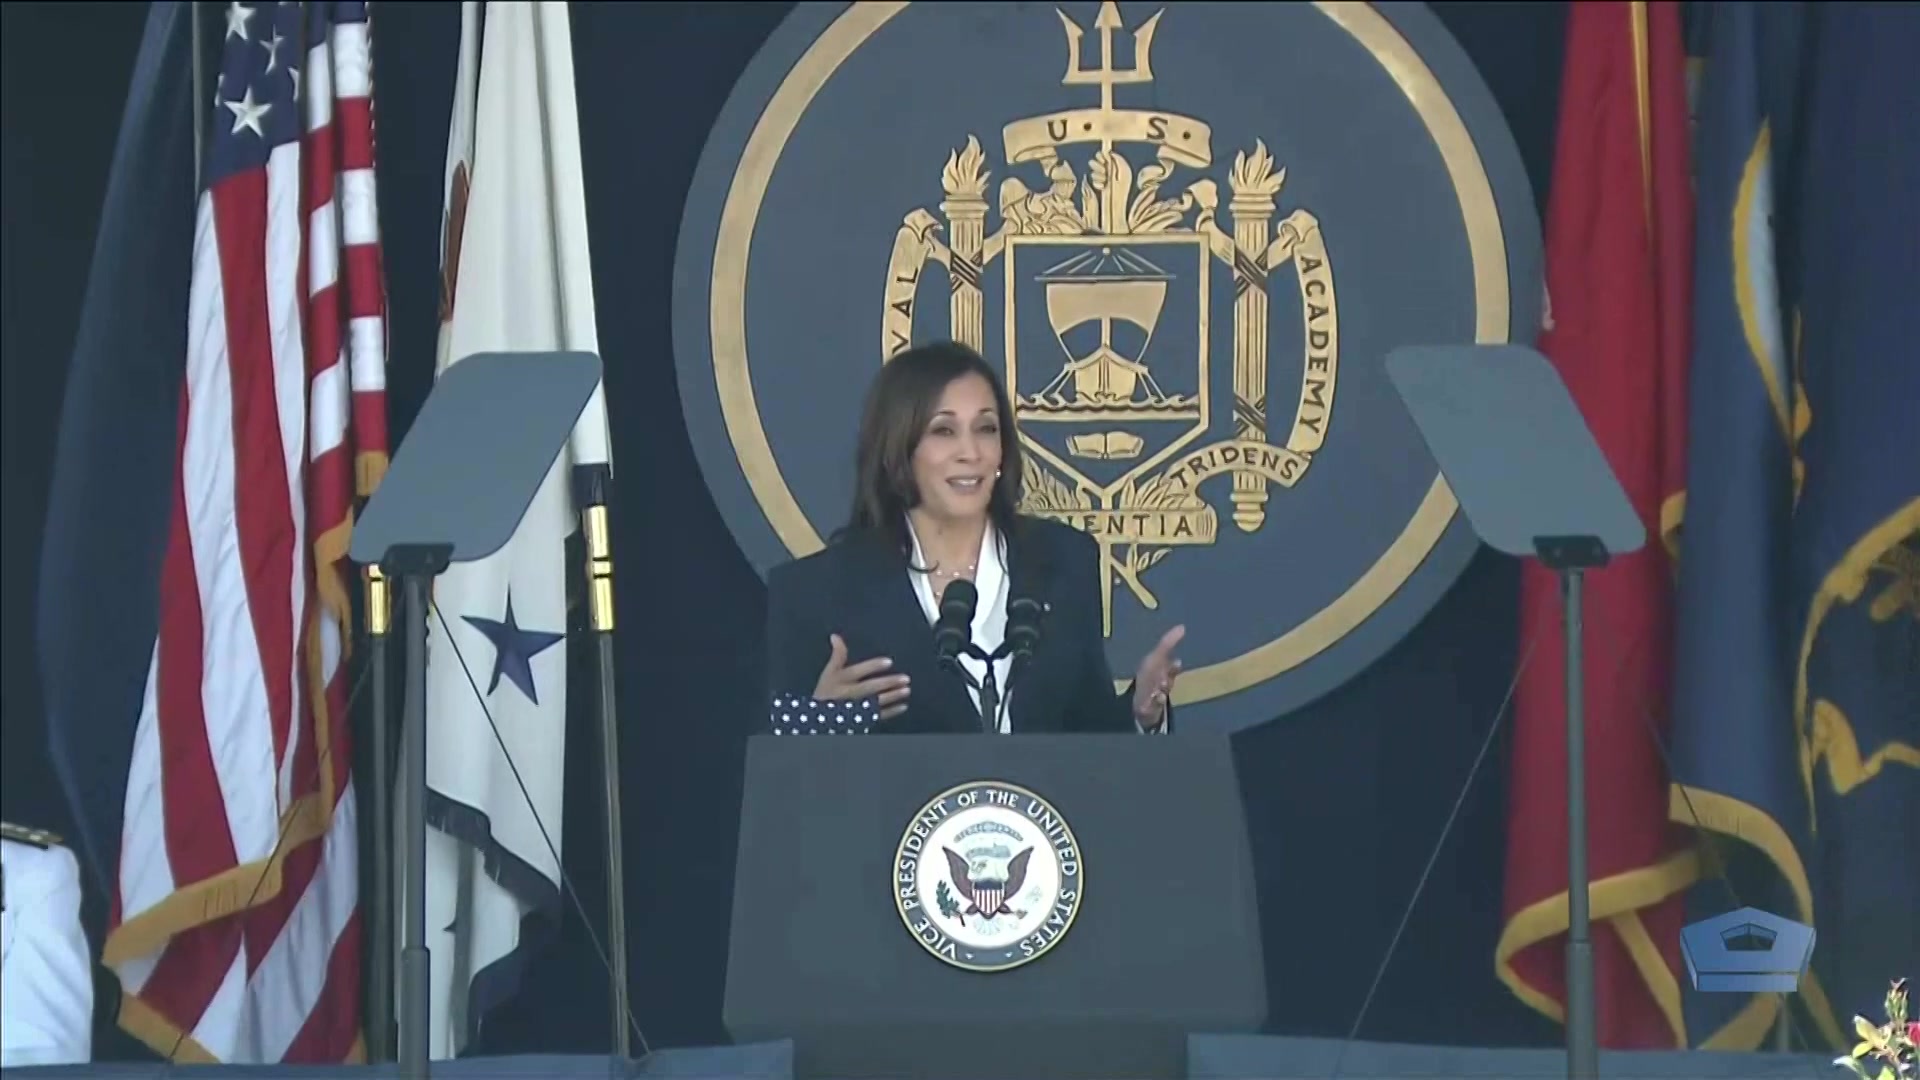 Vice President Kamala Harris delivers the commencement address for the graduation and commissioning ceremony of the Naval Academy's Class of 2021, May 28, 2021.
 
